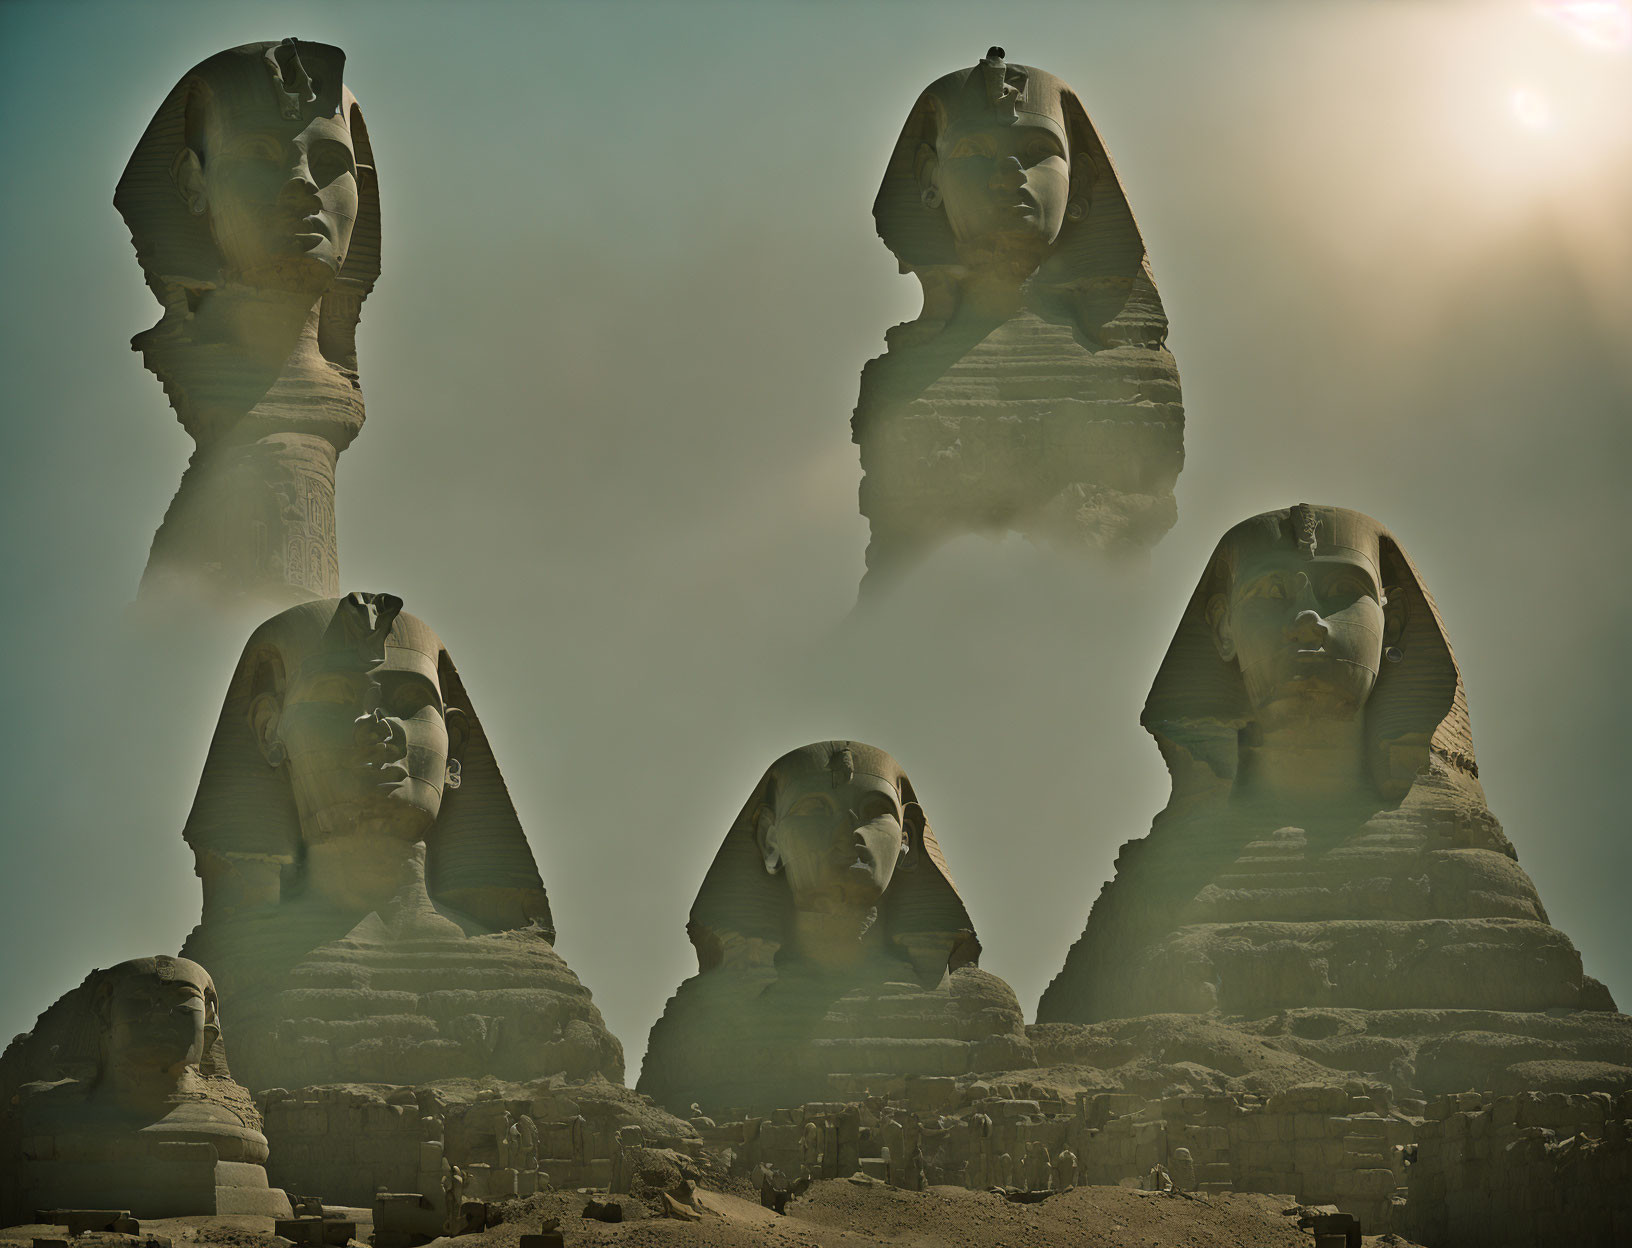 Aaliens and Egyptian civilization